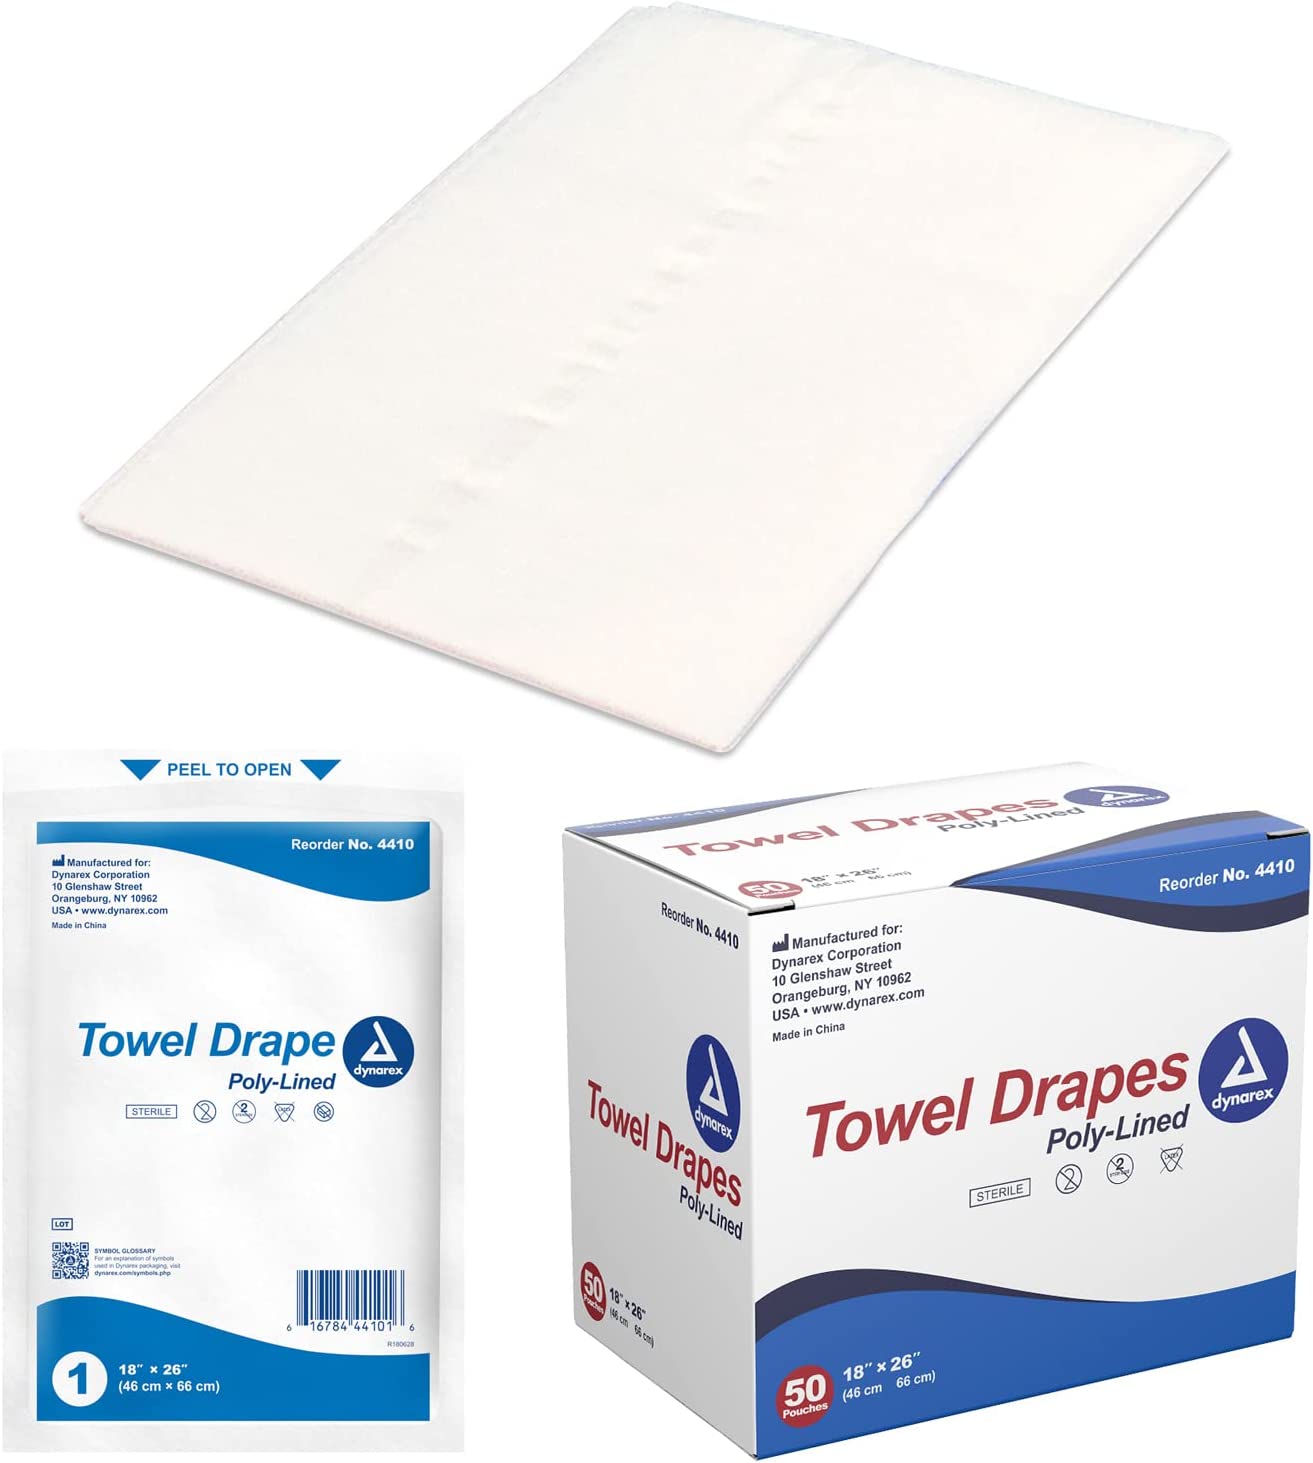 Dynarex Disposable Towel Drapes, Sterile, 18" x 26," for Medical & Surgical Use, Poly-Interlined Lining, Protect from Contaminants